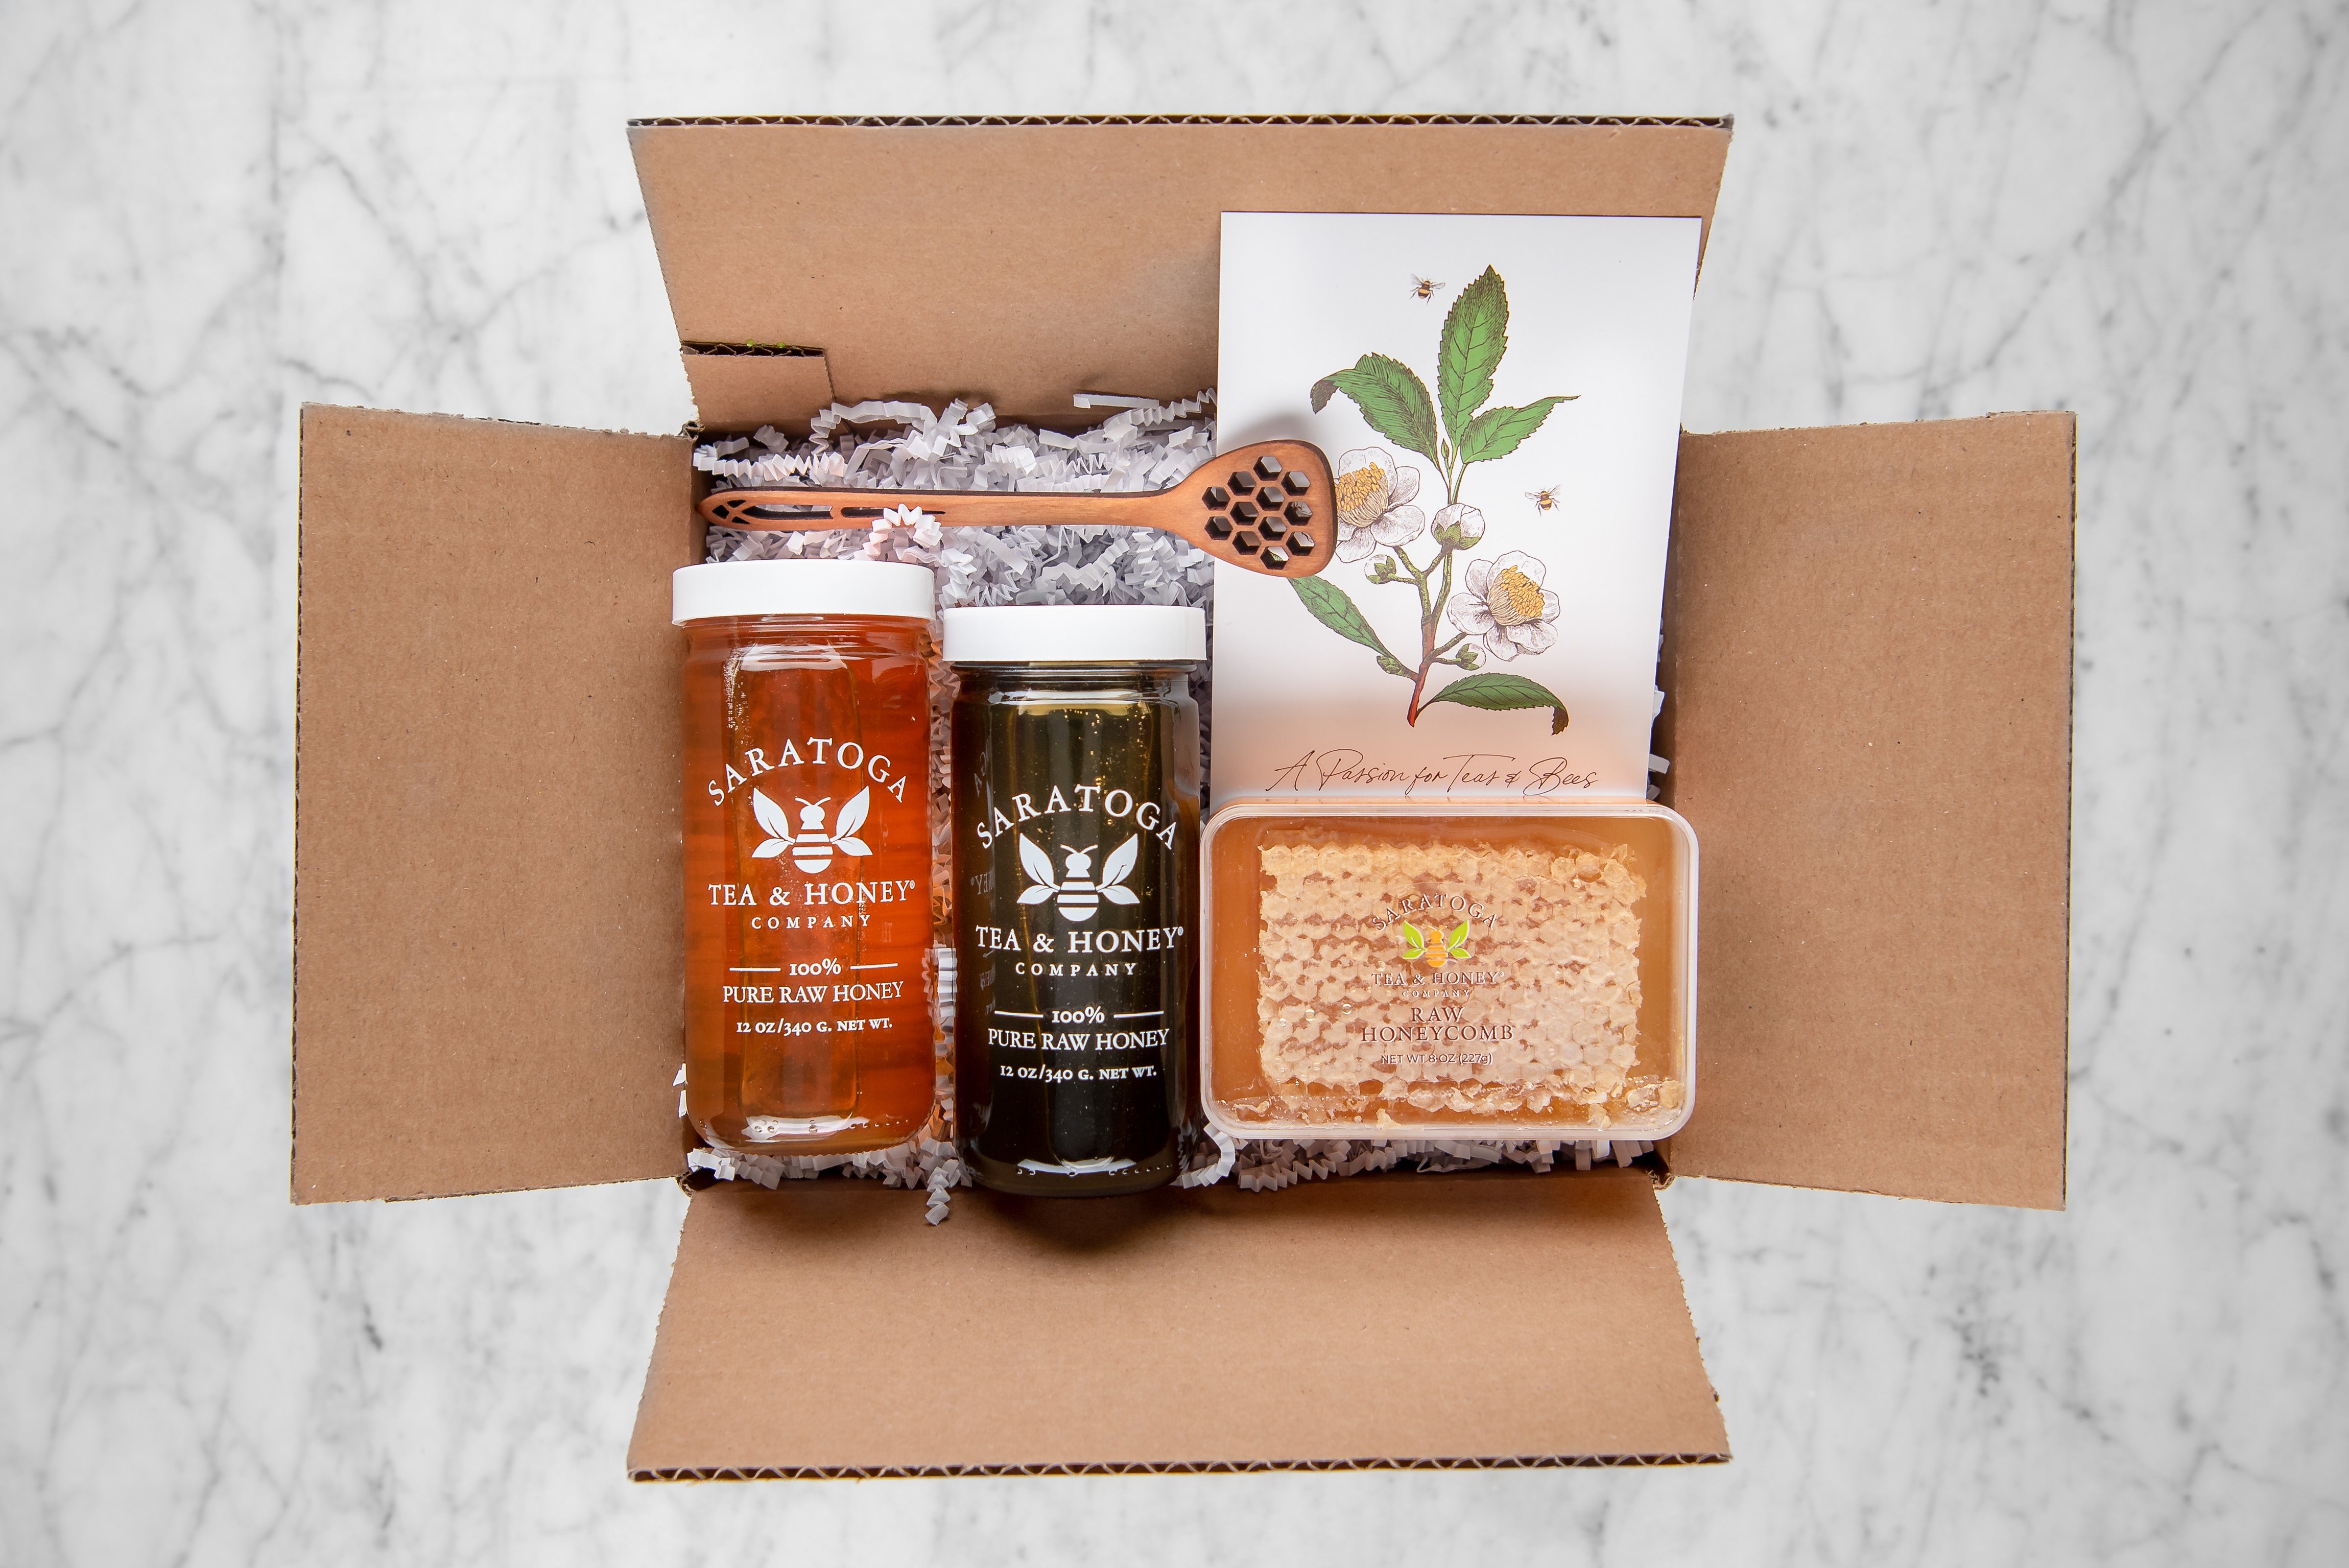 charcuterie honey gift set featuring one dark honey, one light honey, honey comb and a honey dipper made of cherrywood